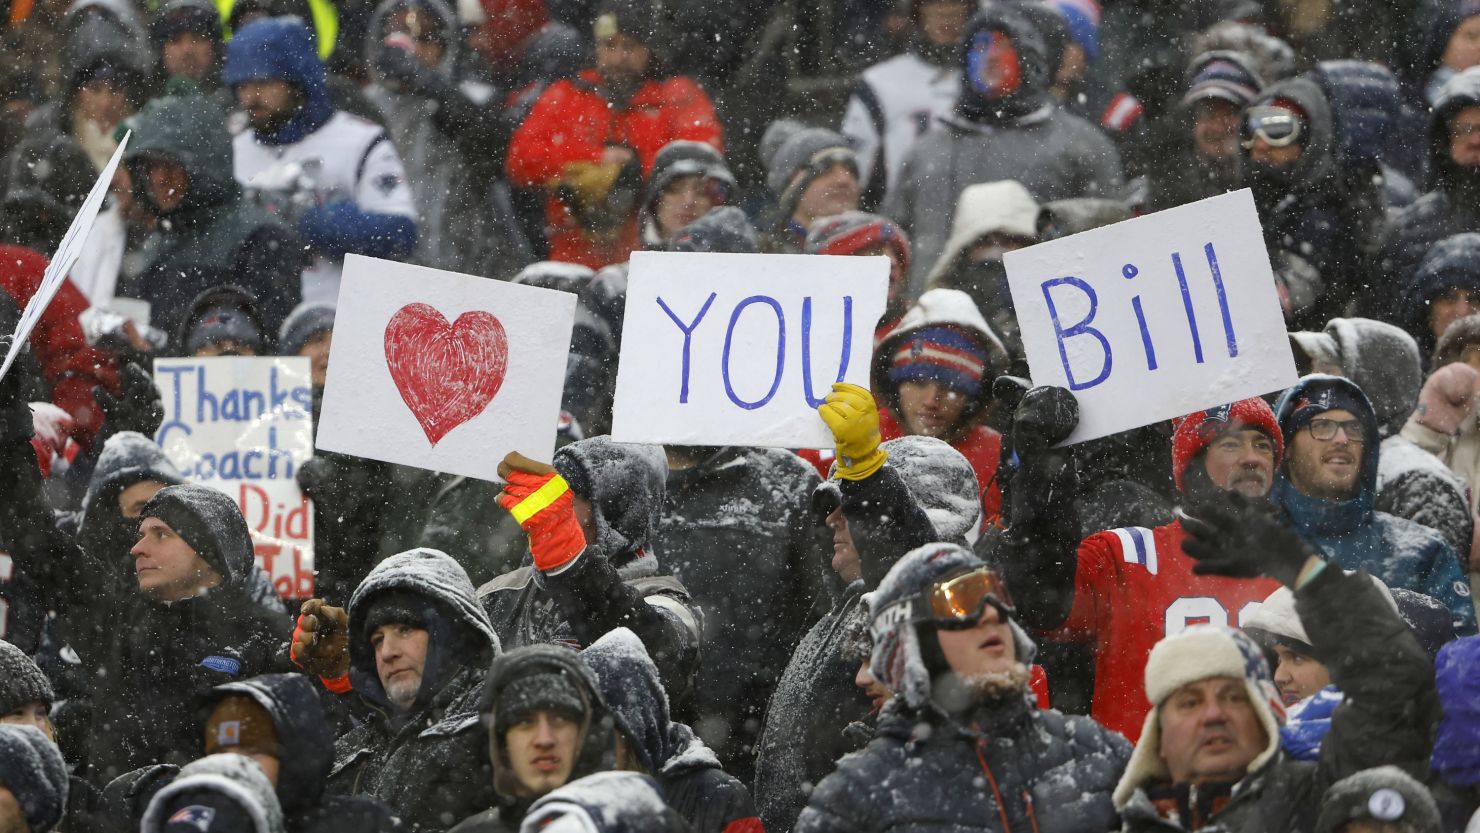 Patriots fans show their love for Belichick during a game against the New York Jets last month.